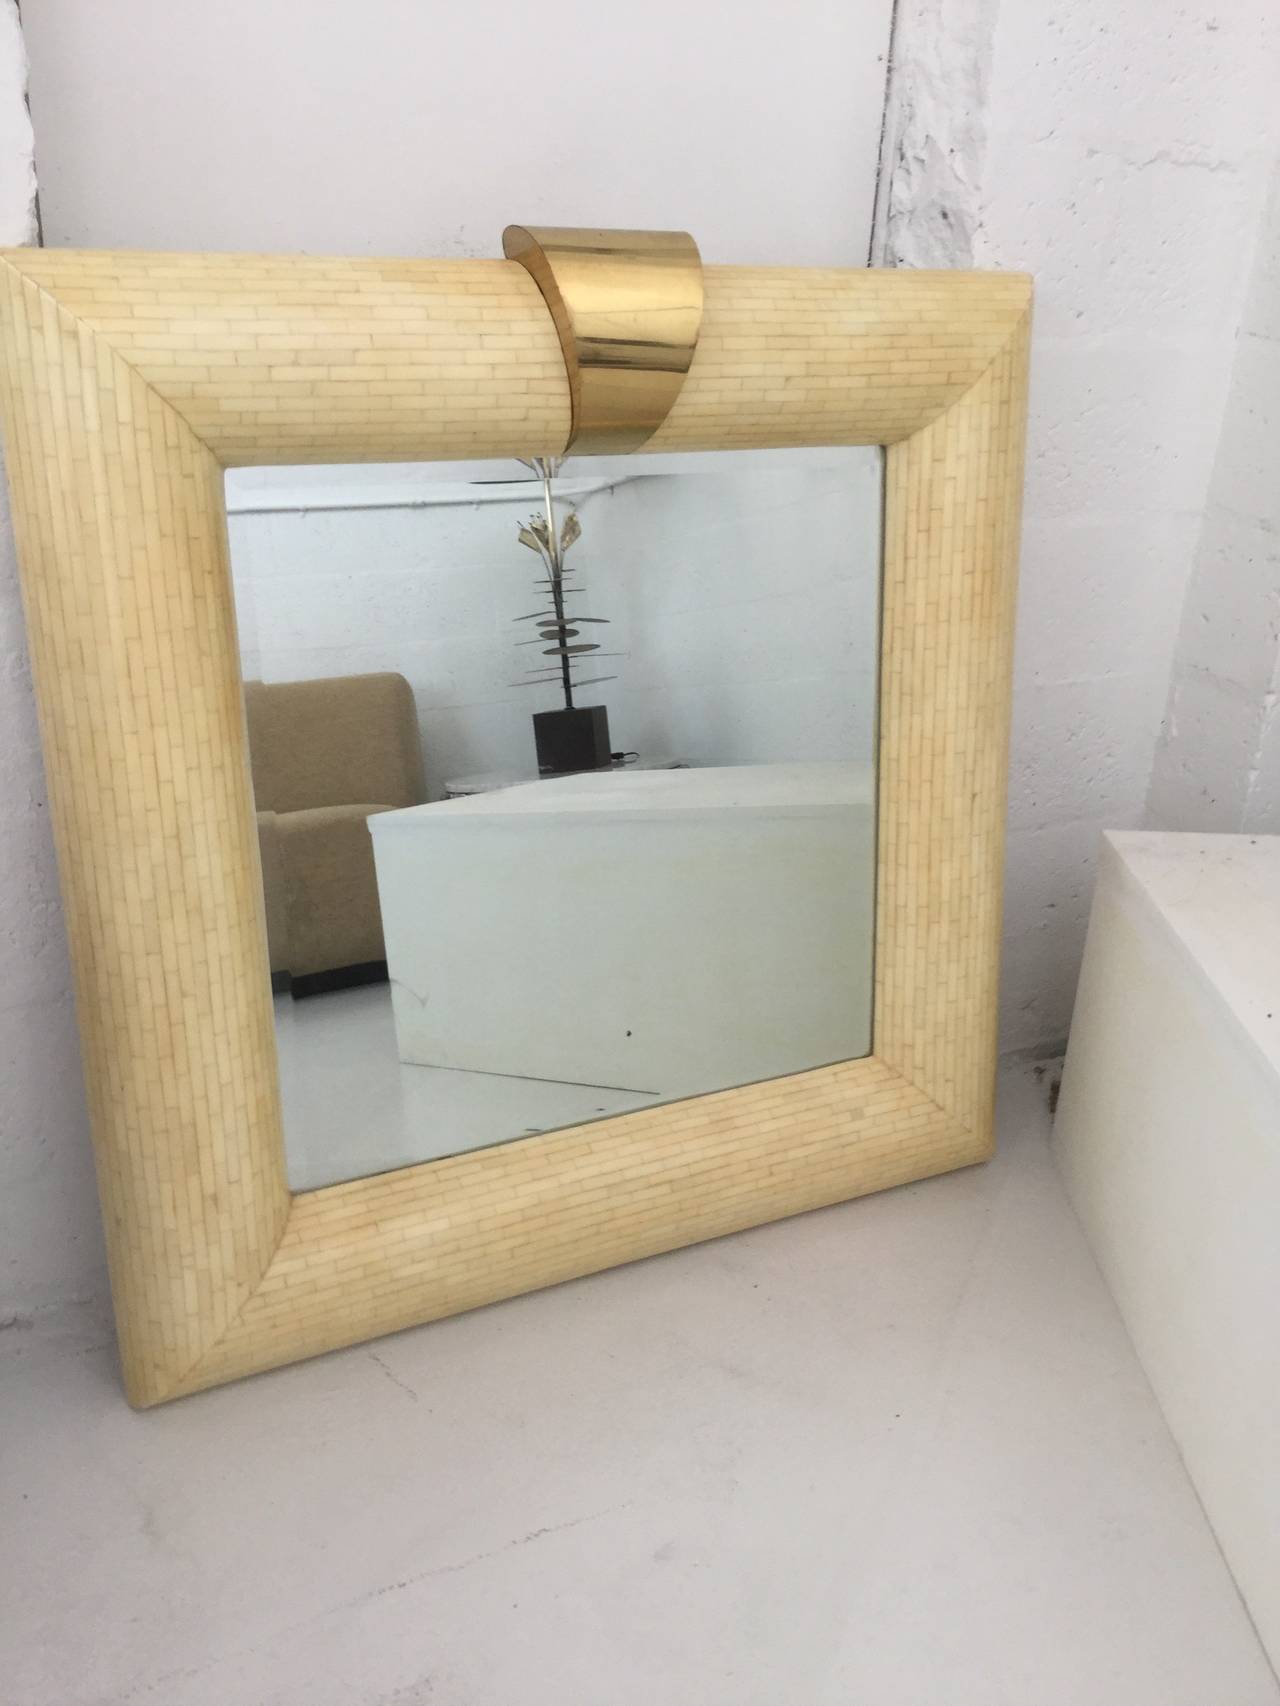 Wall Mirror in the style of Karl Springer 
In tasseleted bone veneer with 6.5" wide,
 3.75"deep frame,
polished brass key at the top.
  